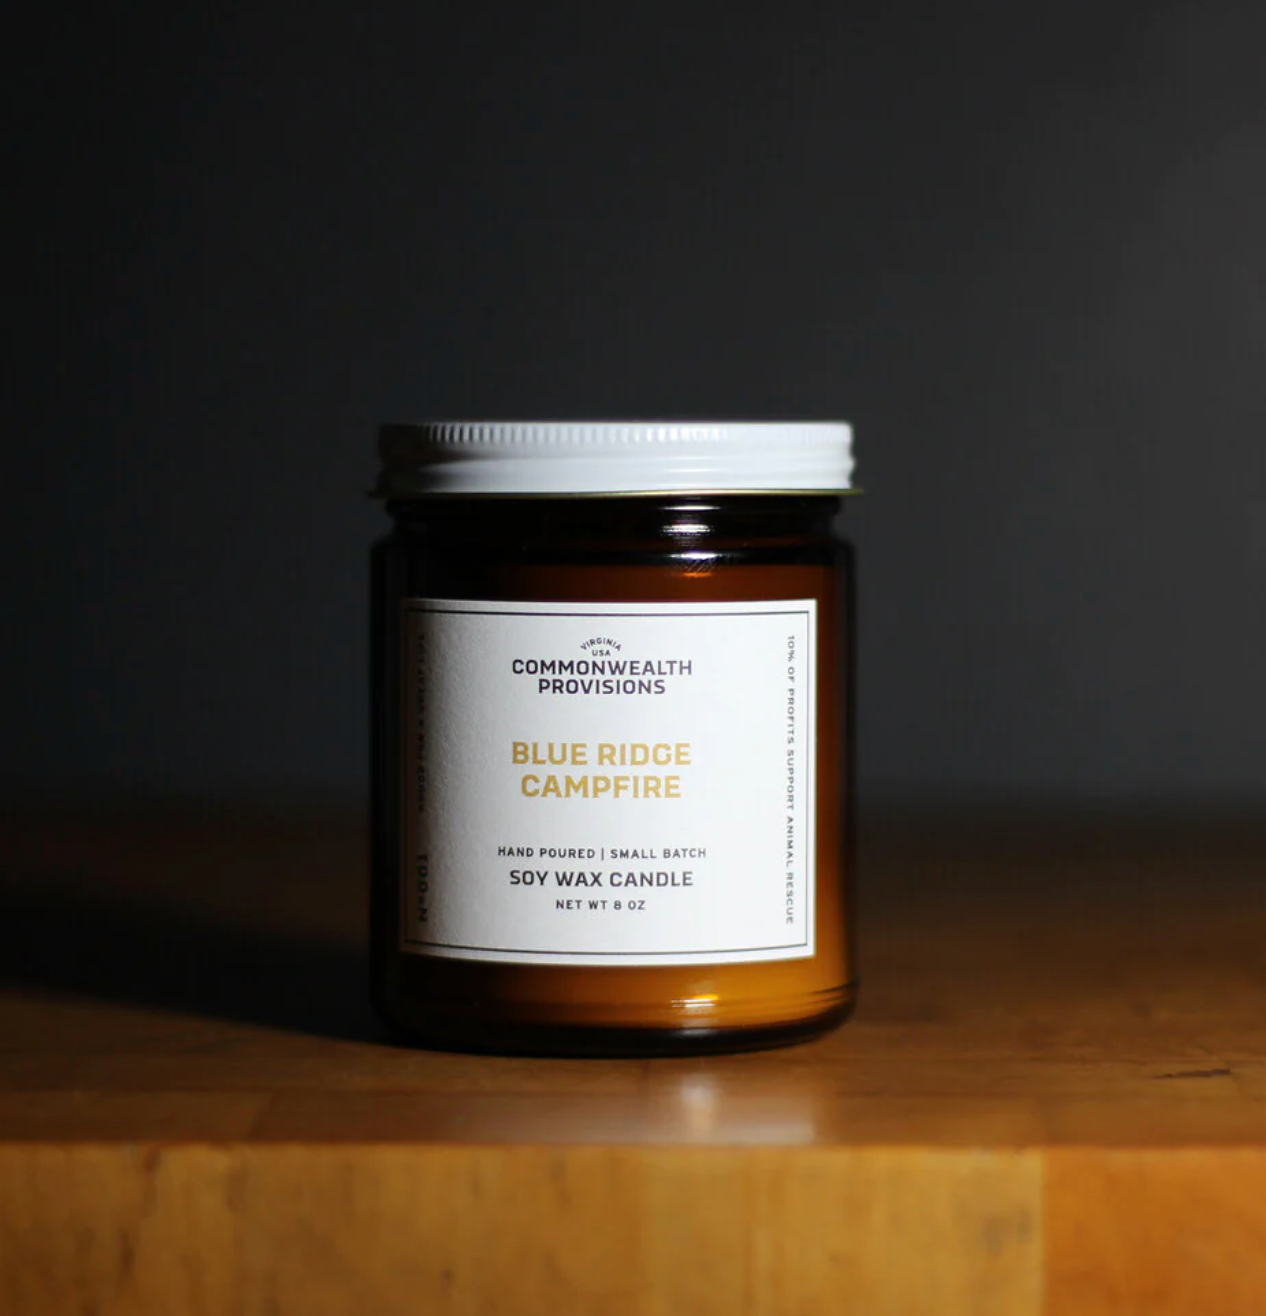 Sox Wax candle in a jar that reads "Blue Ridge Campfire" created by Commonwealth Provisions